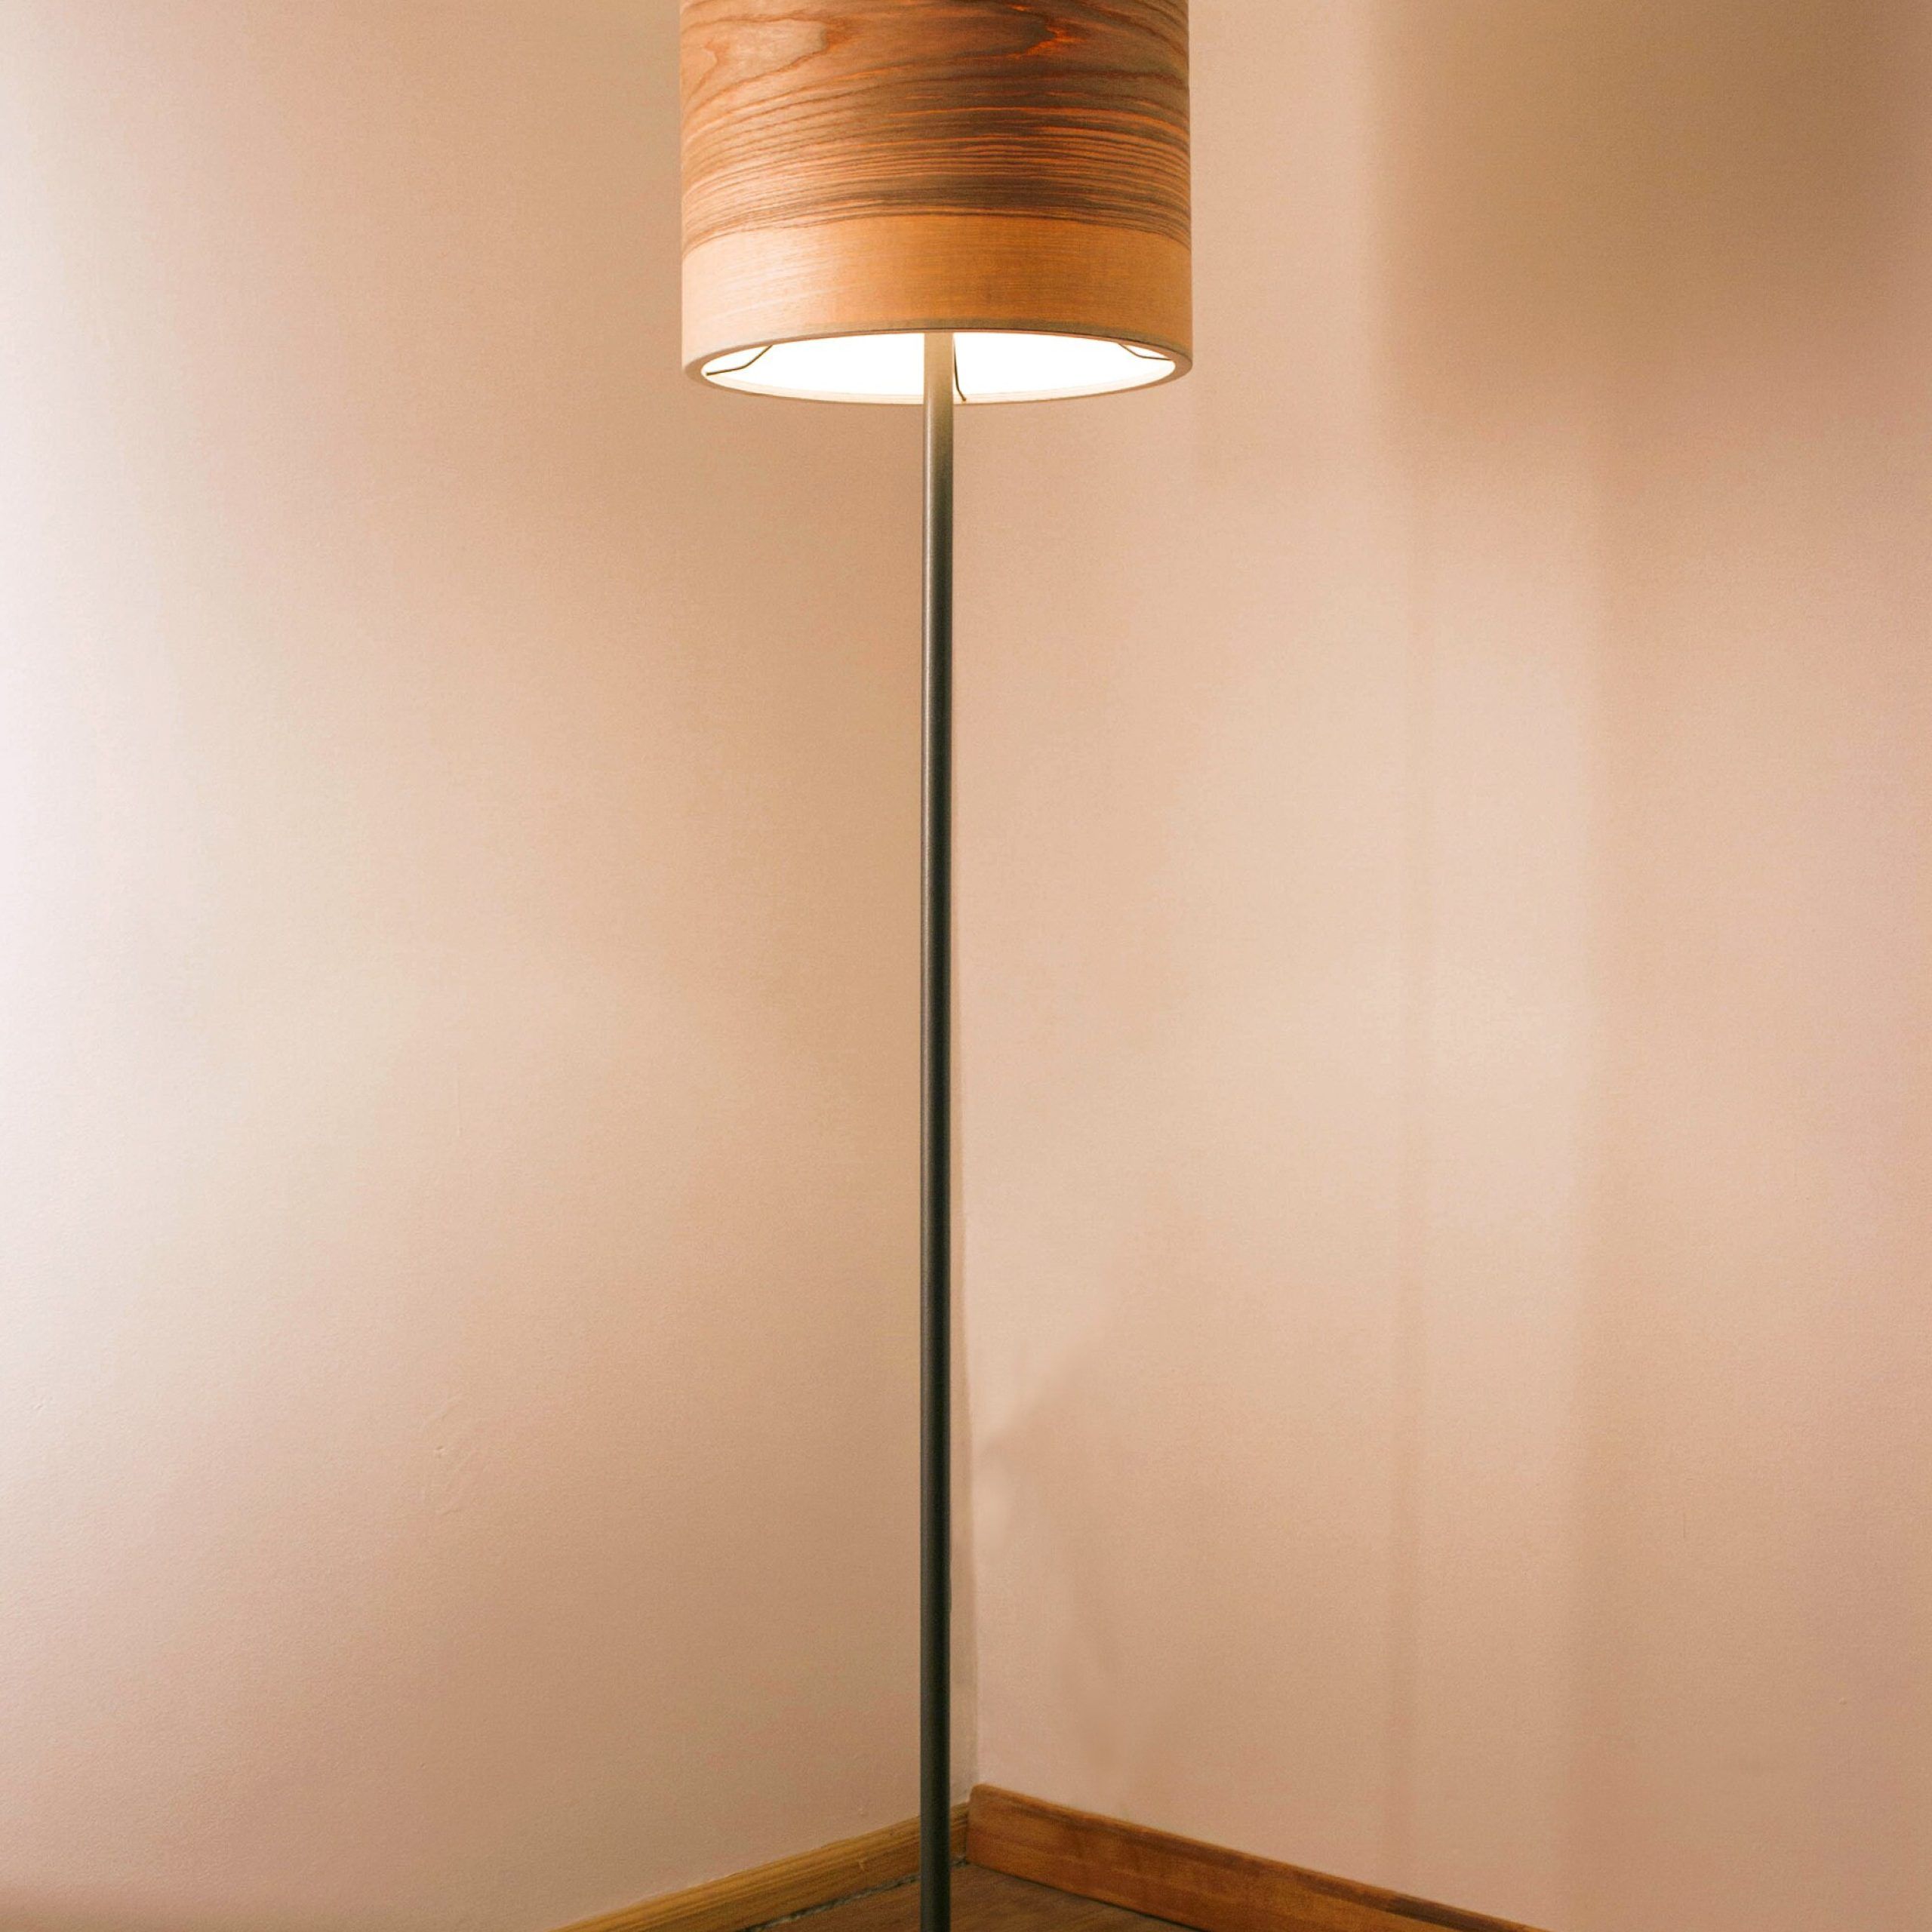 Floor Lamp Simona Floor Natural Color Wooden – Etsy Intended For Minimalist Floor Lamps (View 13 of 15)